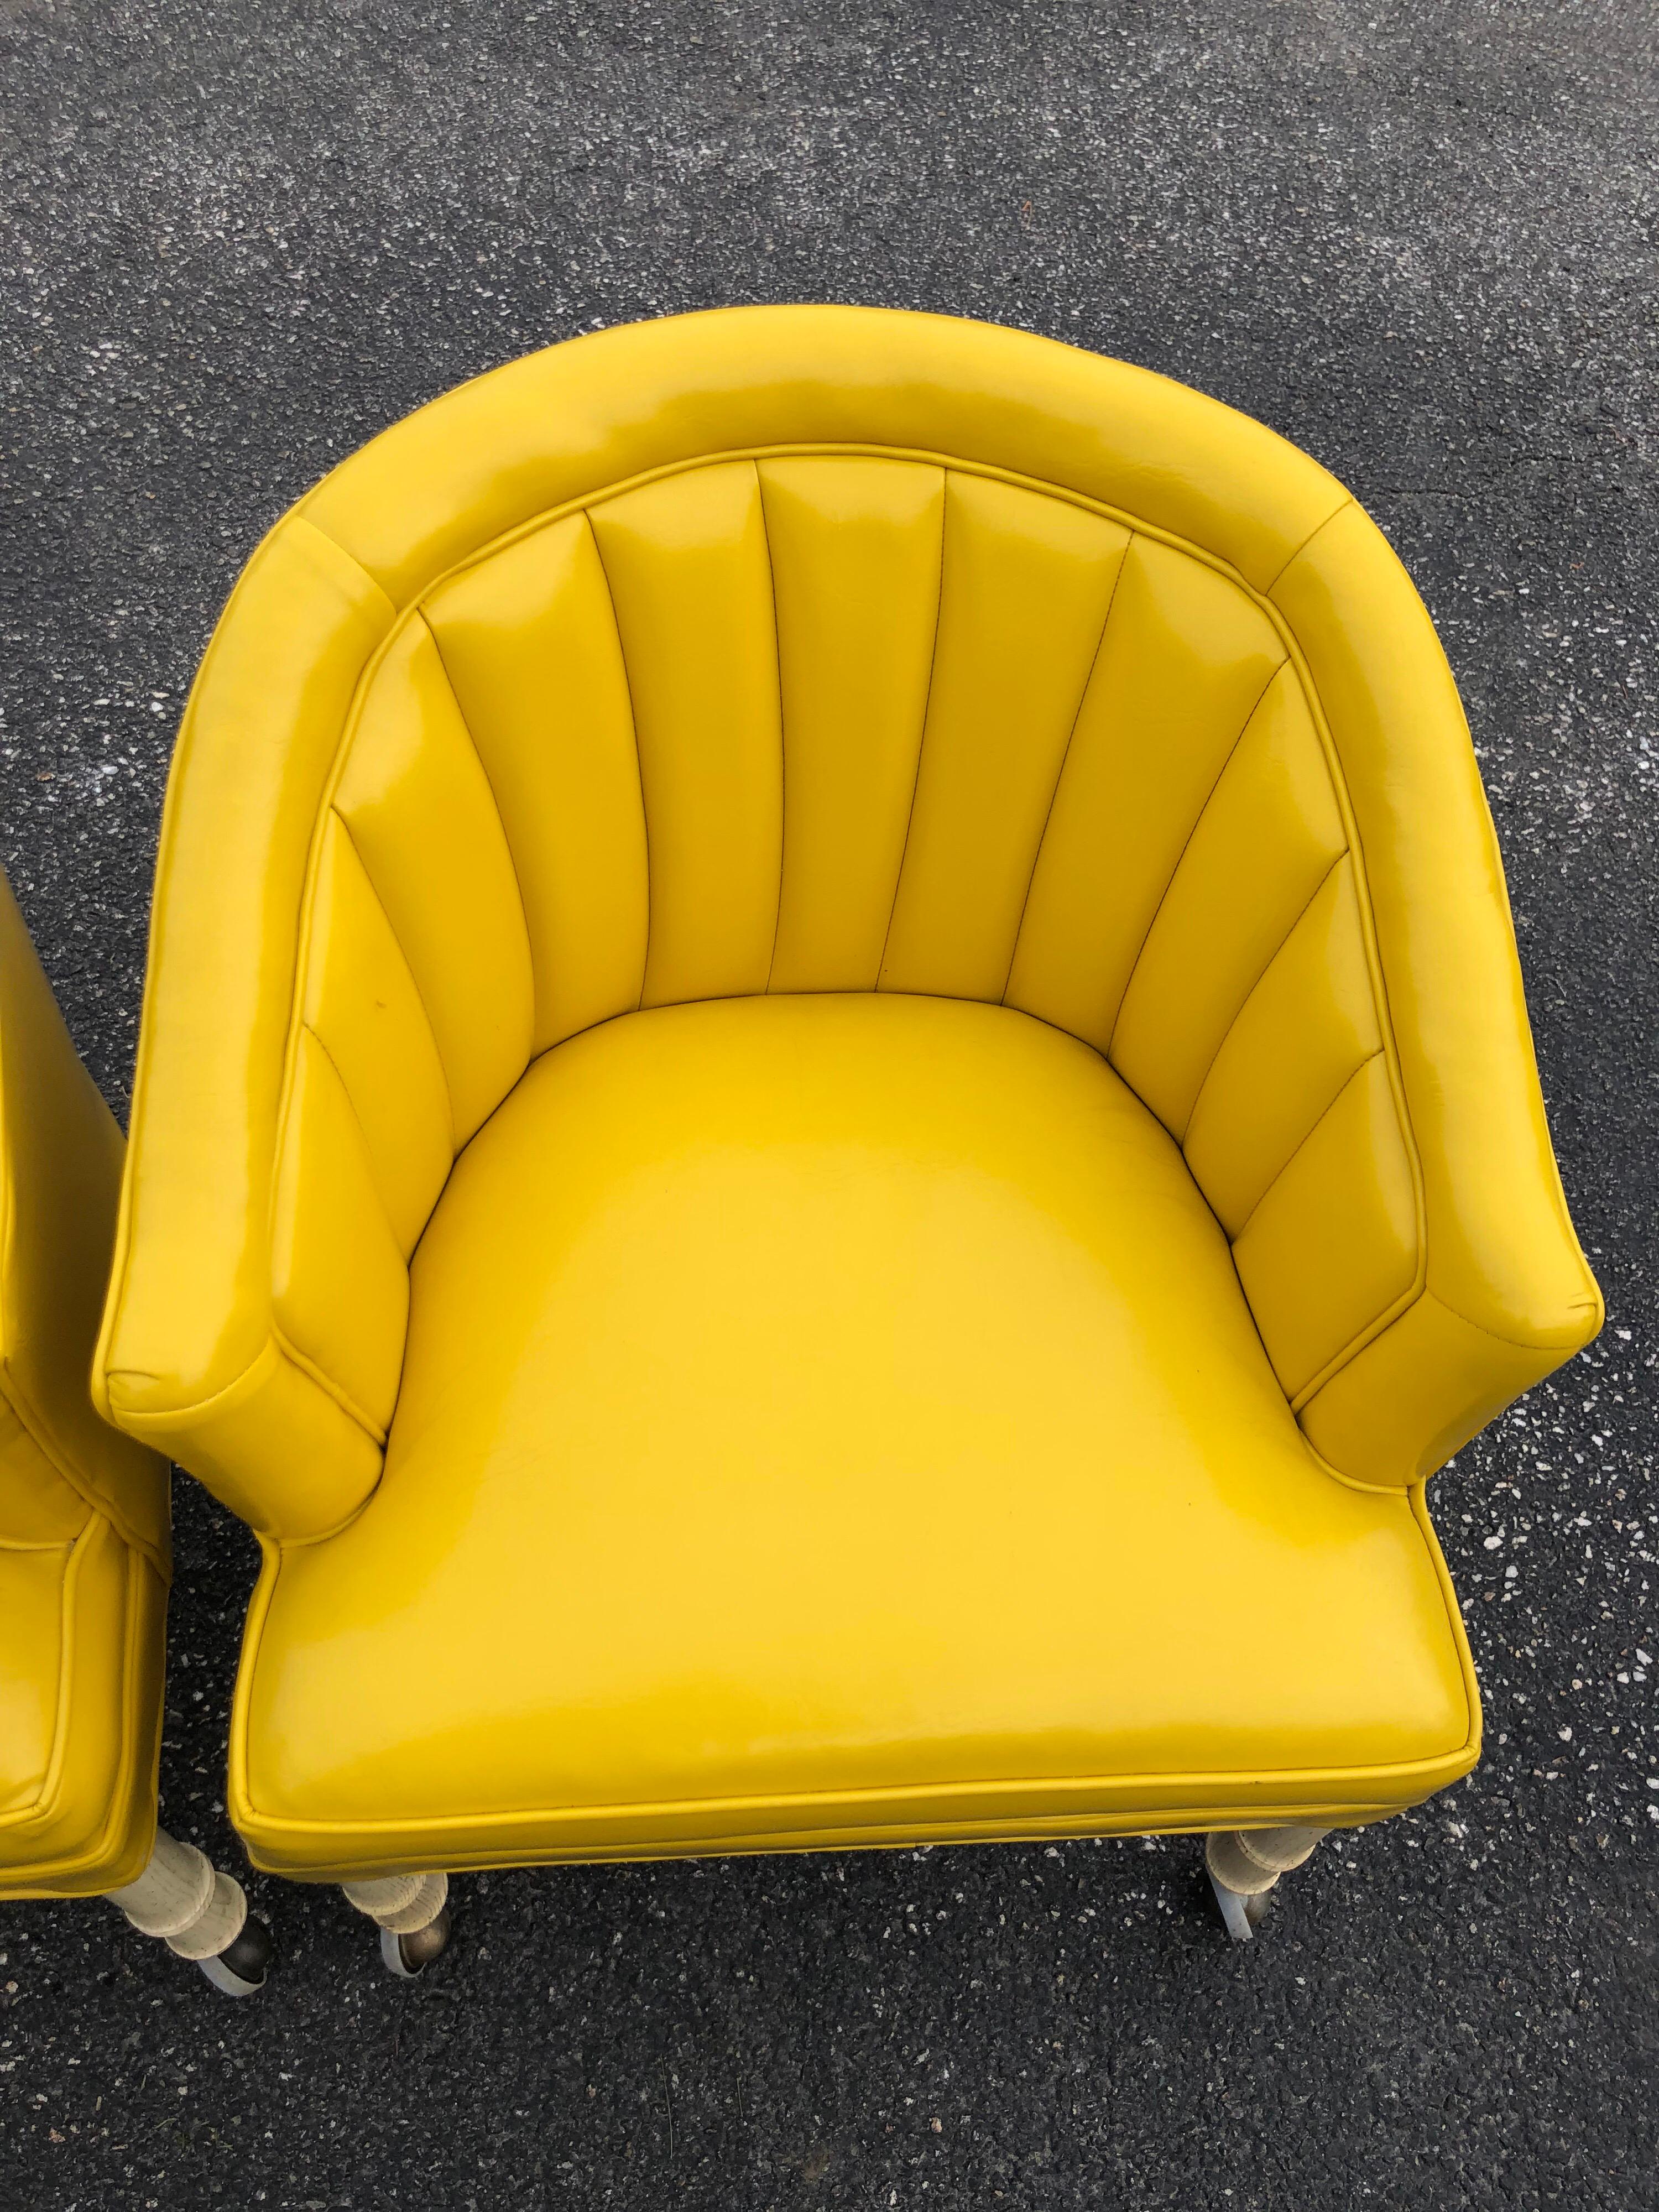 PVC Pair of Bright Yellow Channel Back Chairs on Castors